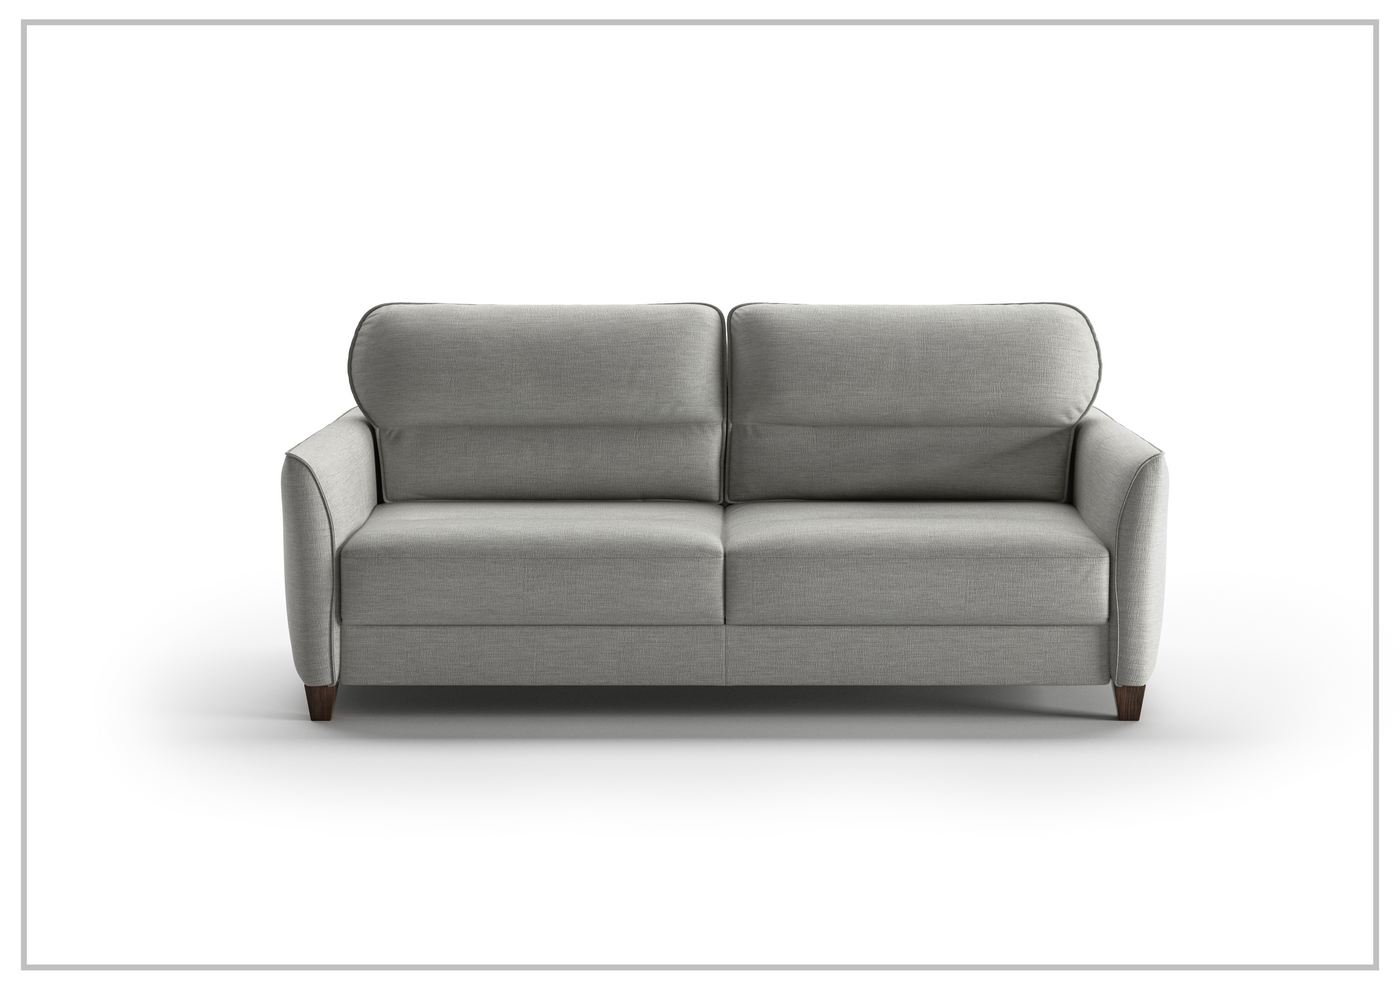 Luonto Harold Fabric Sofa Sleeper with Back and Neck Support